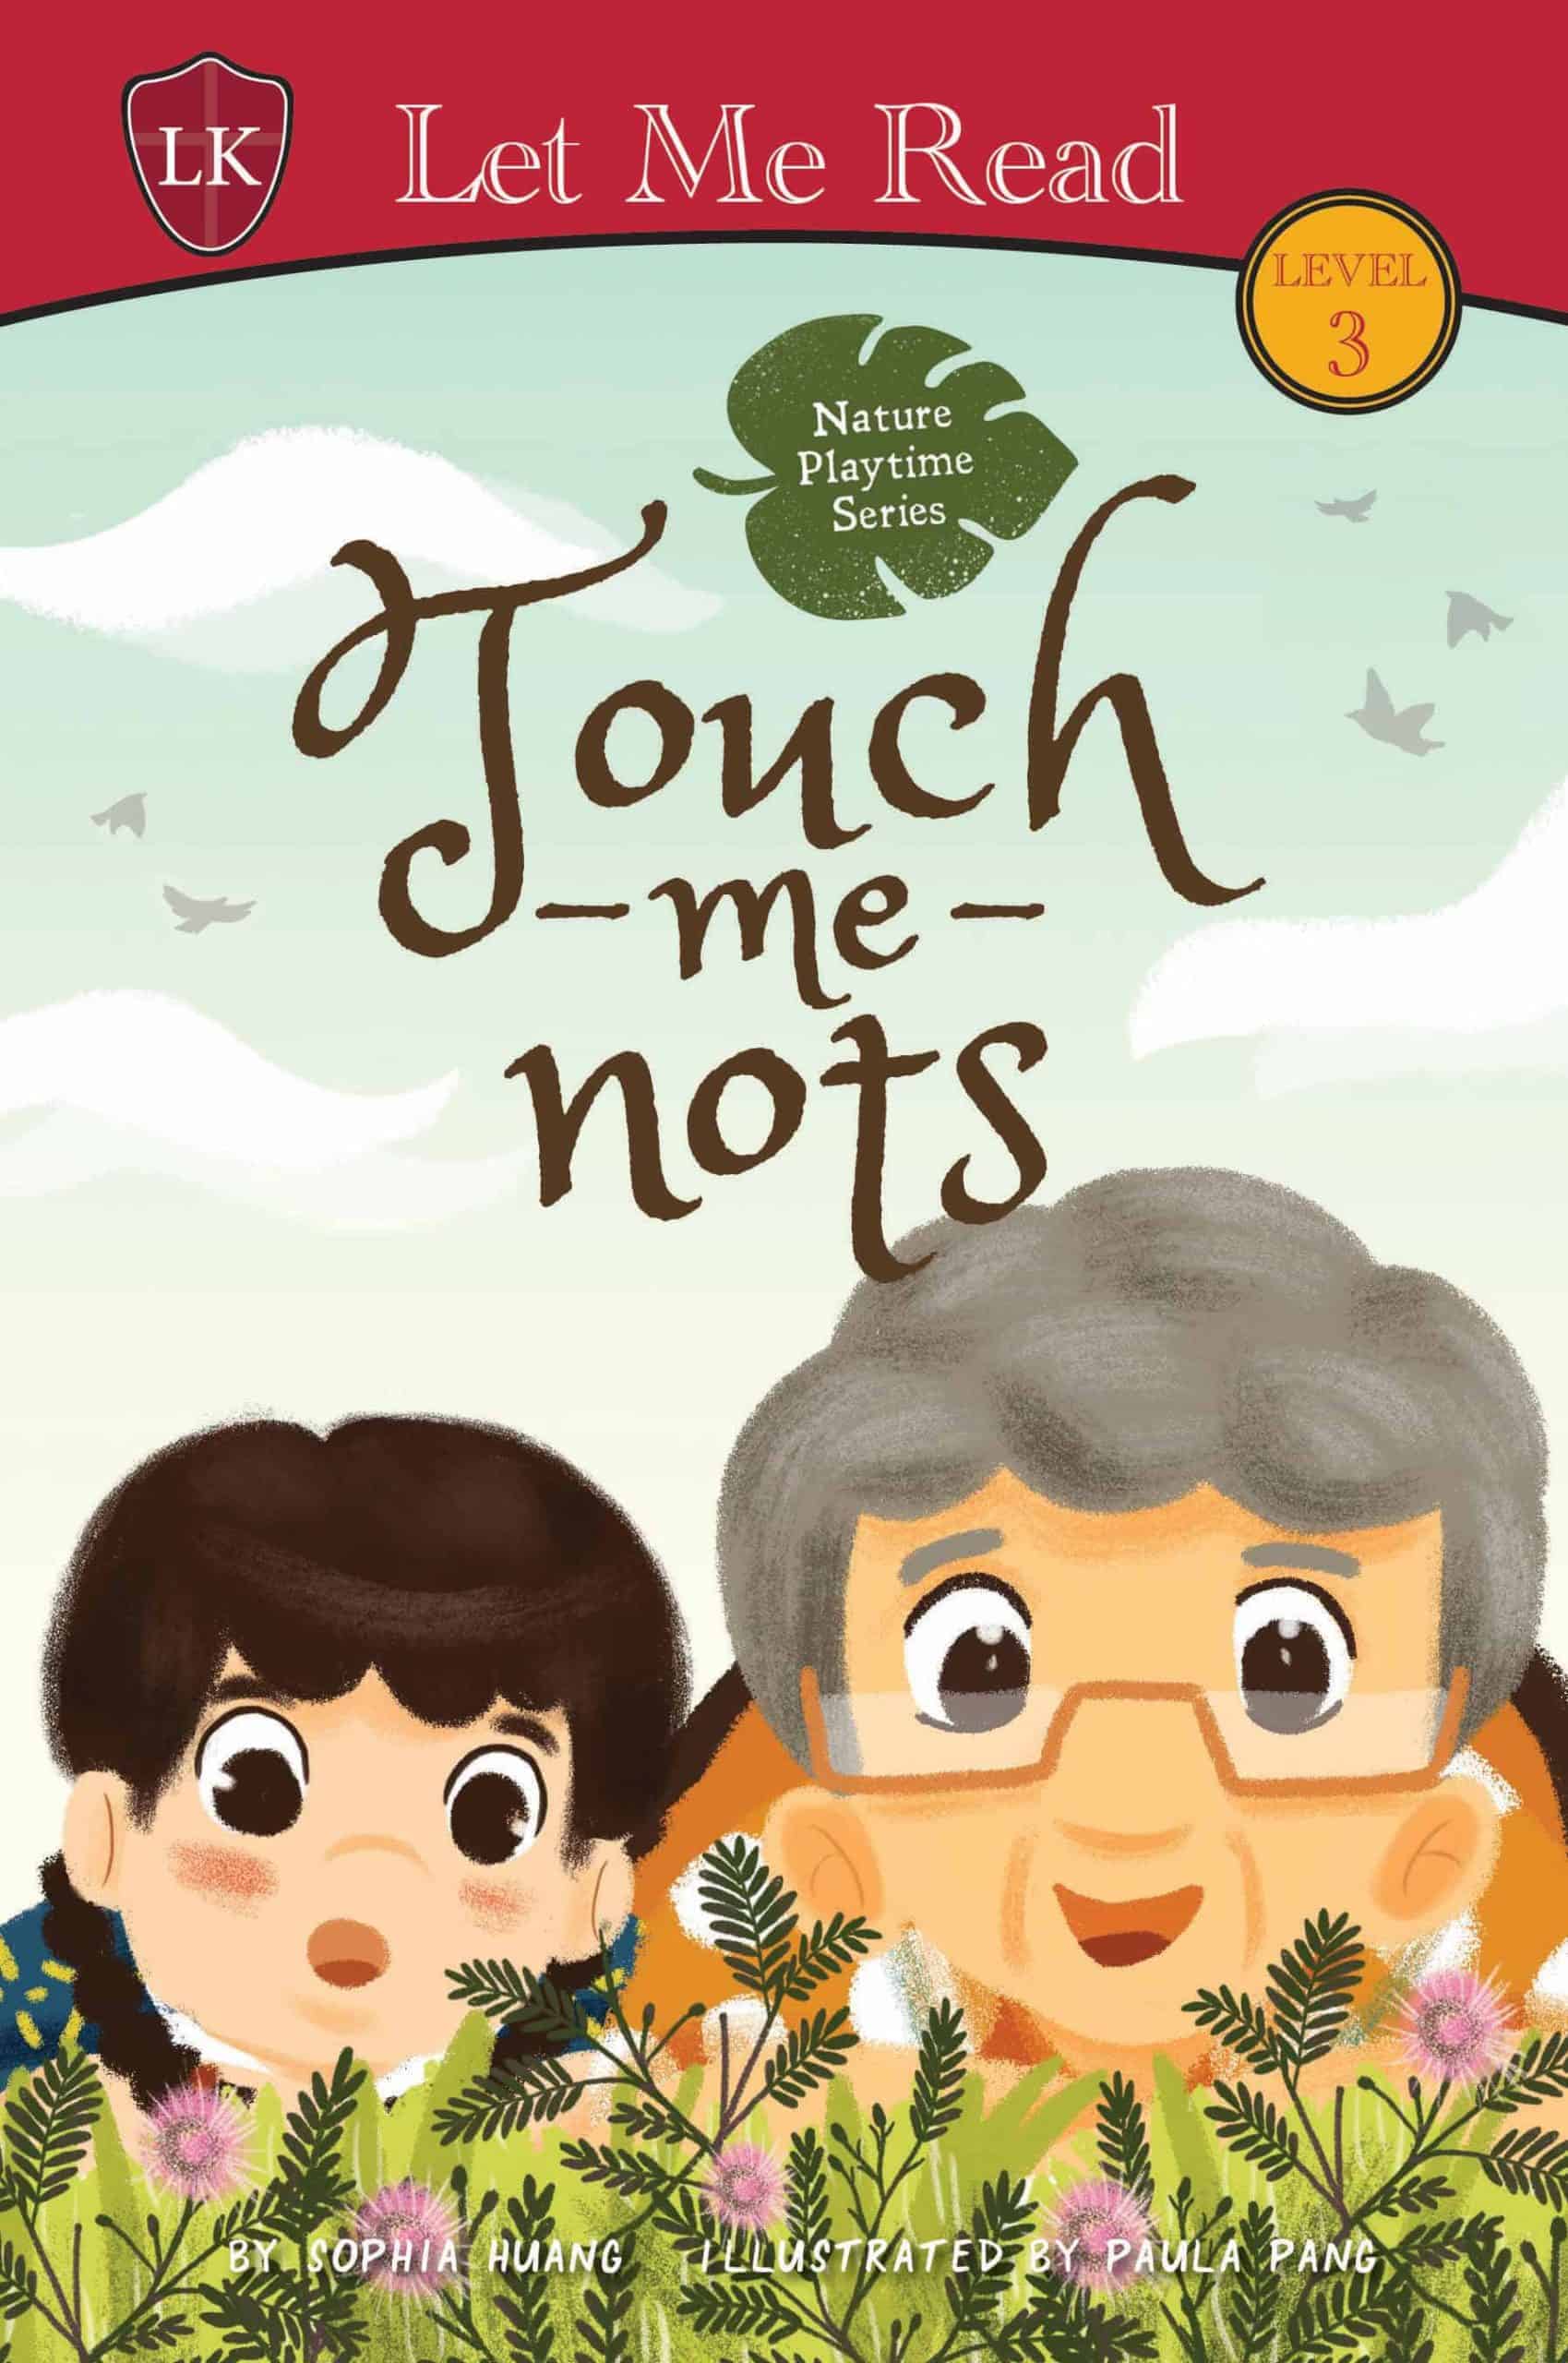 Nature Playtime (Level 3): Touch-Me-Nots